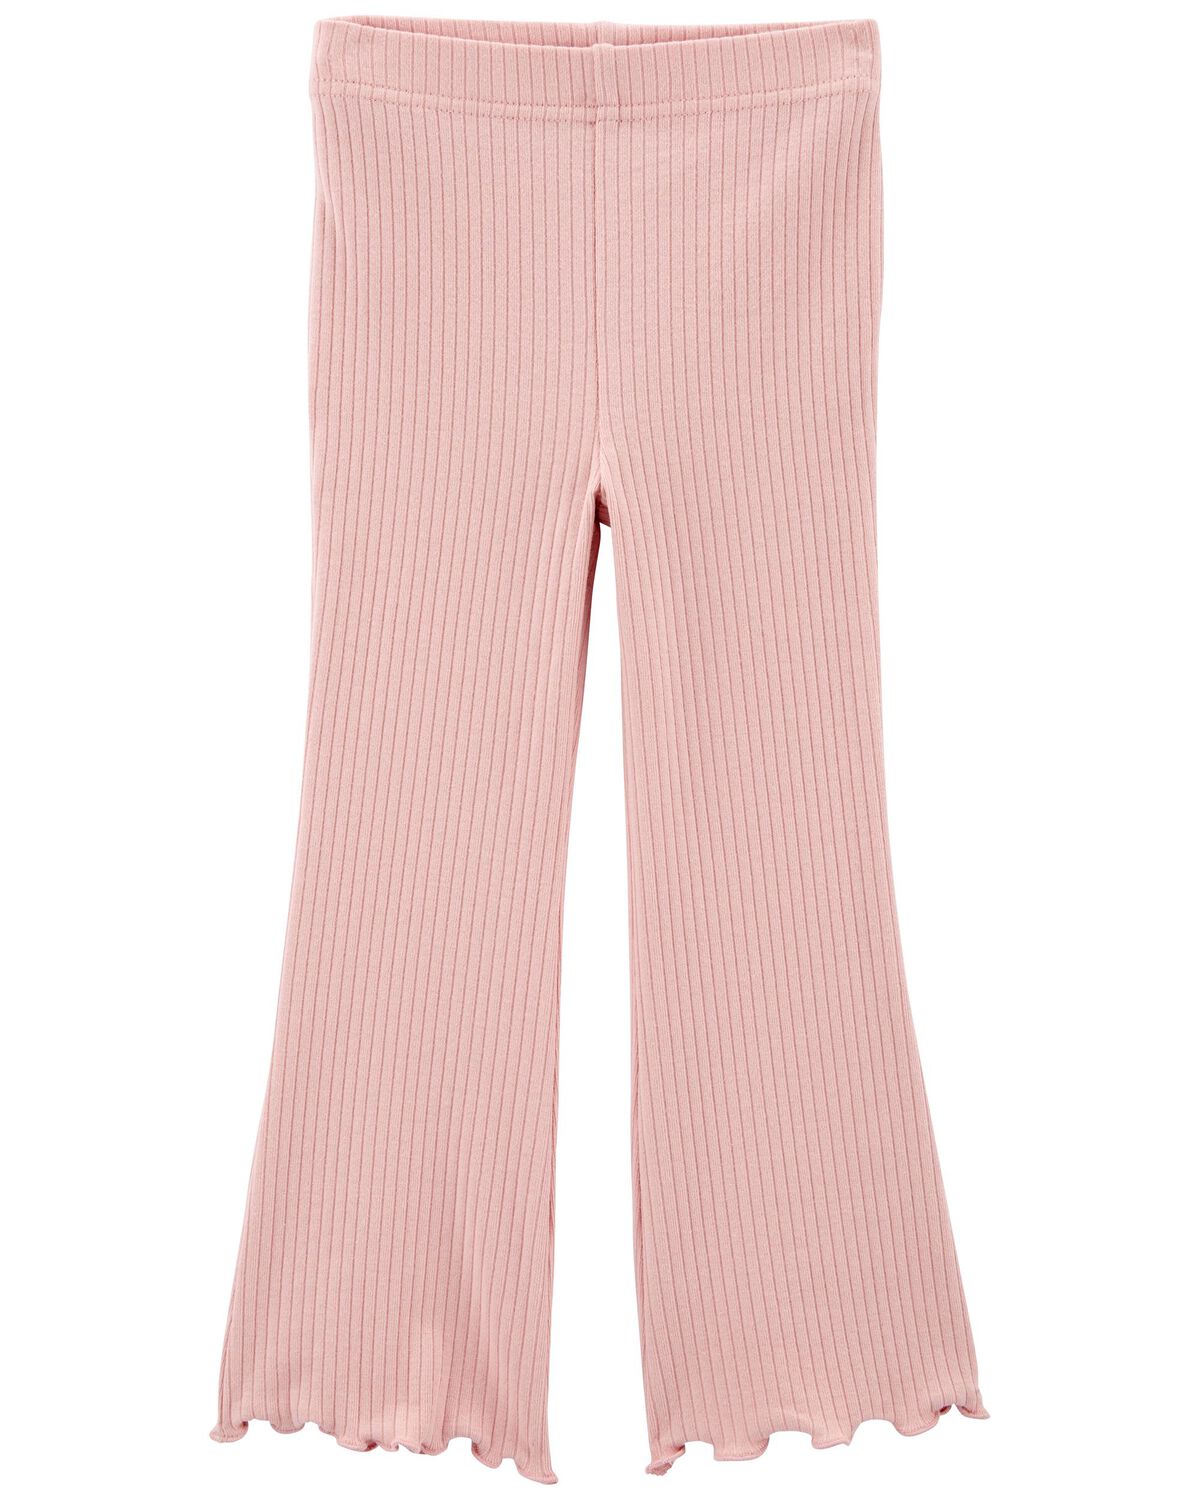 Pink Toddler Pull-On Flare Pants | carters.com